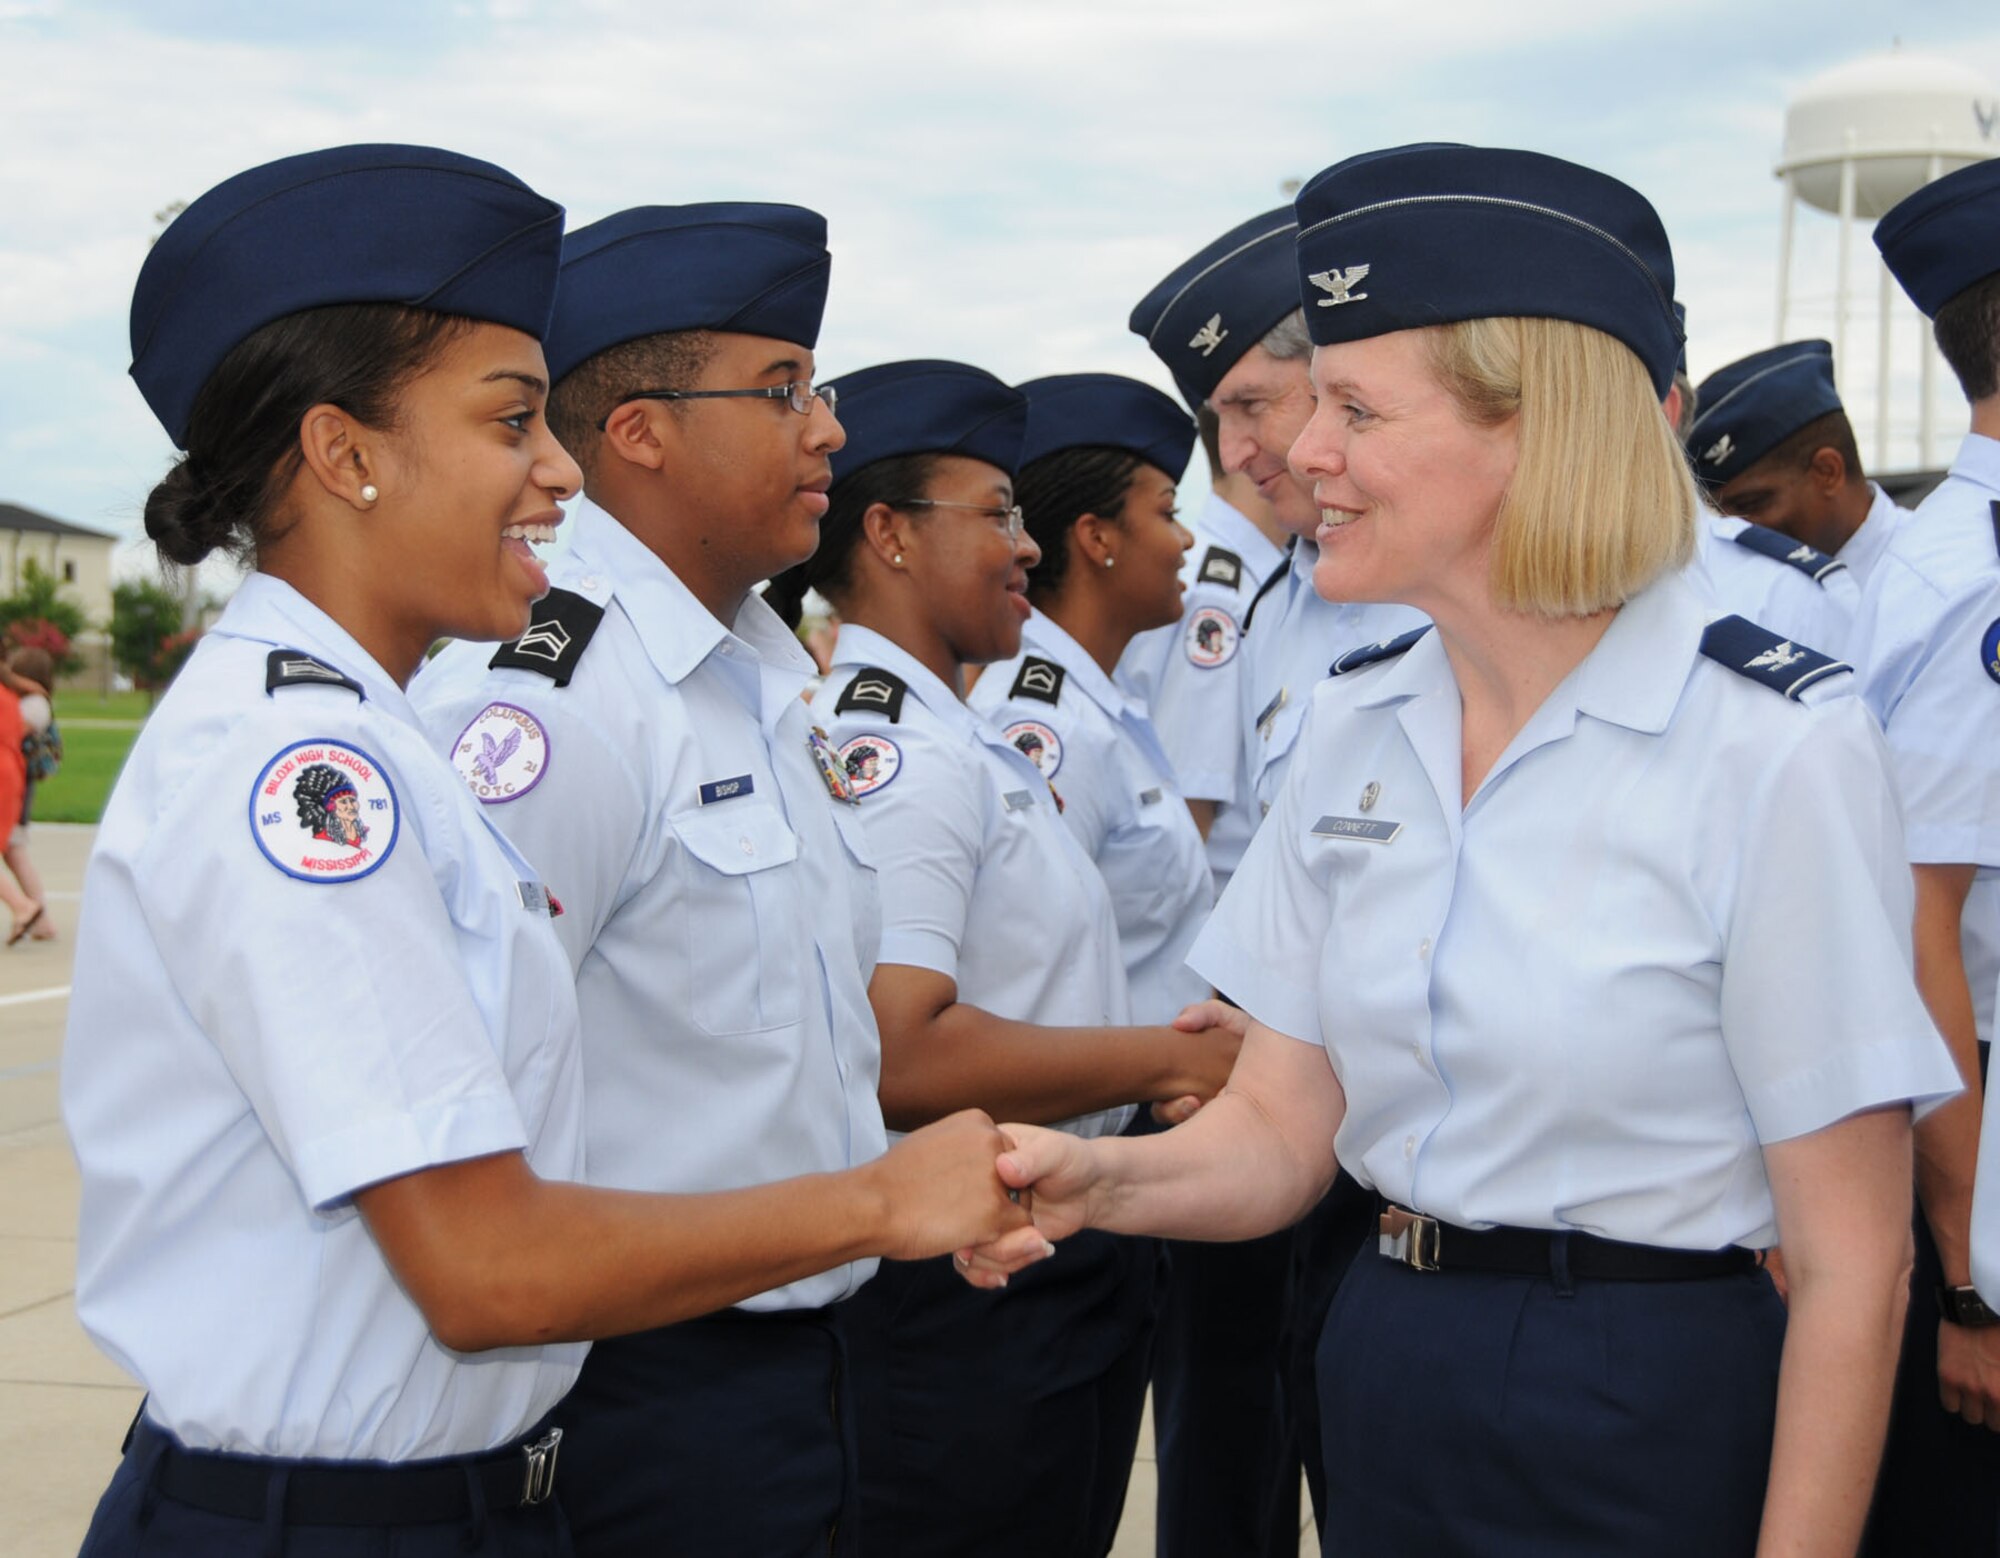 Biloxi High School Cadet Jeanece Kelly, left, meets Col. Lynn Connett, 81st Training Group commander, during Friday’s parade at the conclusion of the Junior ROTC Summer Leadership School at Keesler last week.  Cadet Kelly’s parents are Jimmy and Katrina Kelly.  Her father is the retired former command chief at 2nd Air Force.  The annual school, hosted by Biloxi High’s ROTC program for units from Mississippi and surrounding states, includes physical training, lectures, marching, uniform inspections, team building exercises, speeches and drill evaluations.  Cadets live, eat and study on base during the week.  (U.S. Air Force photo by Kemberly Groue)